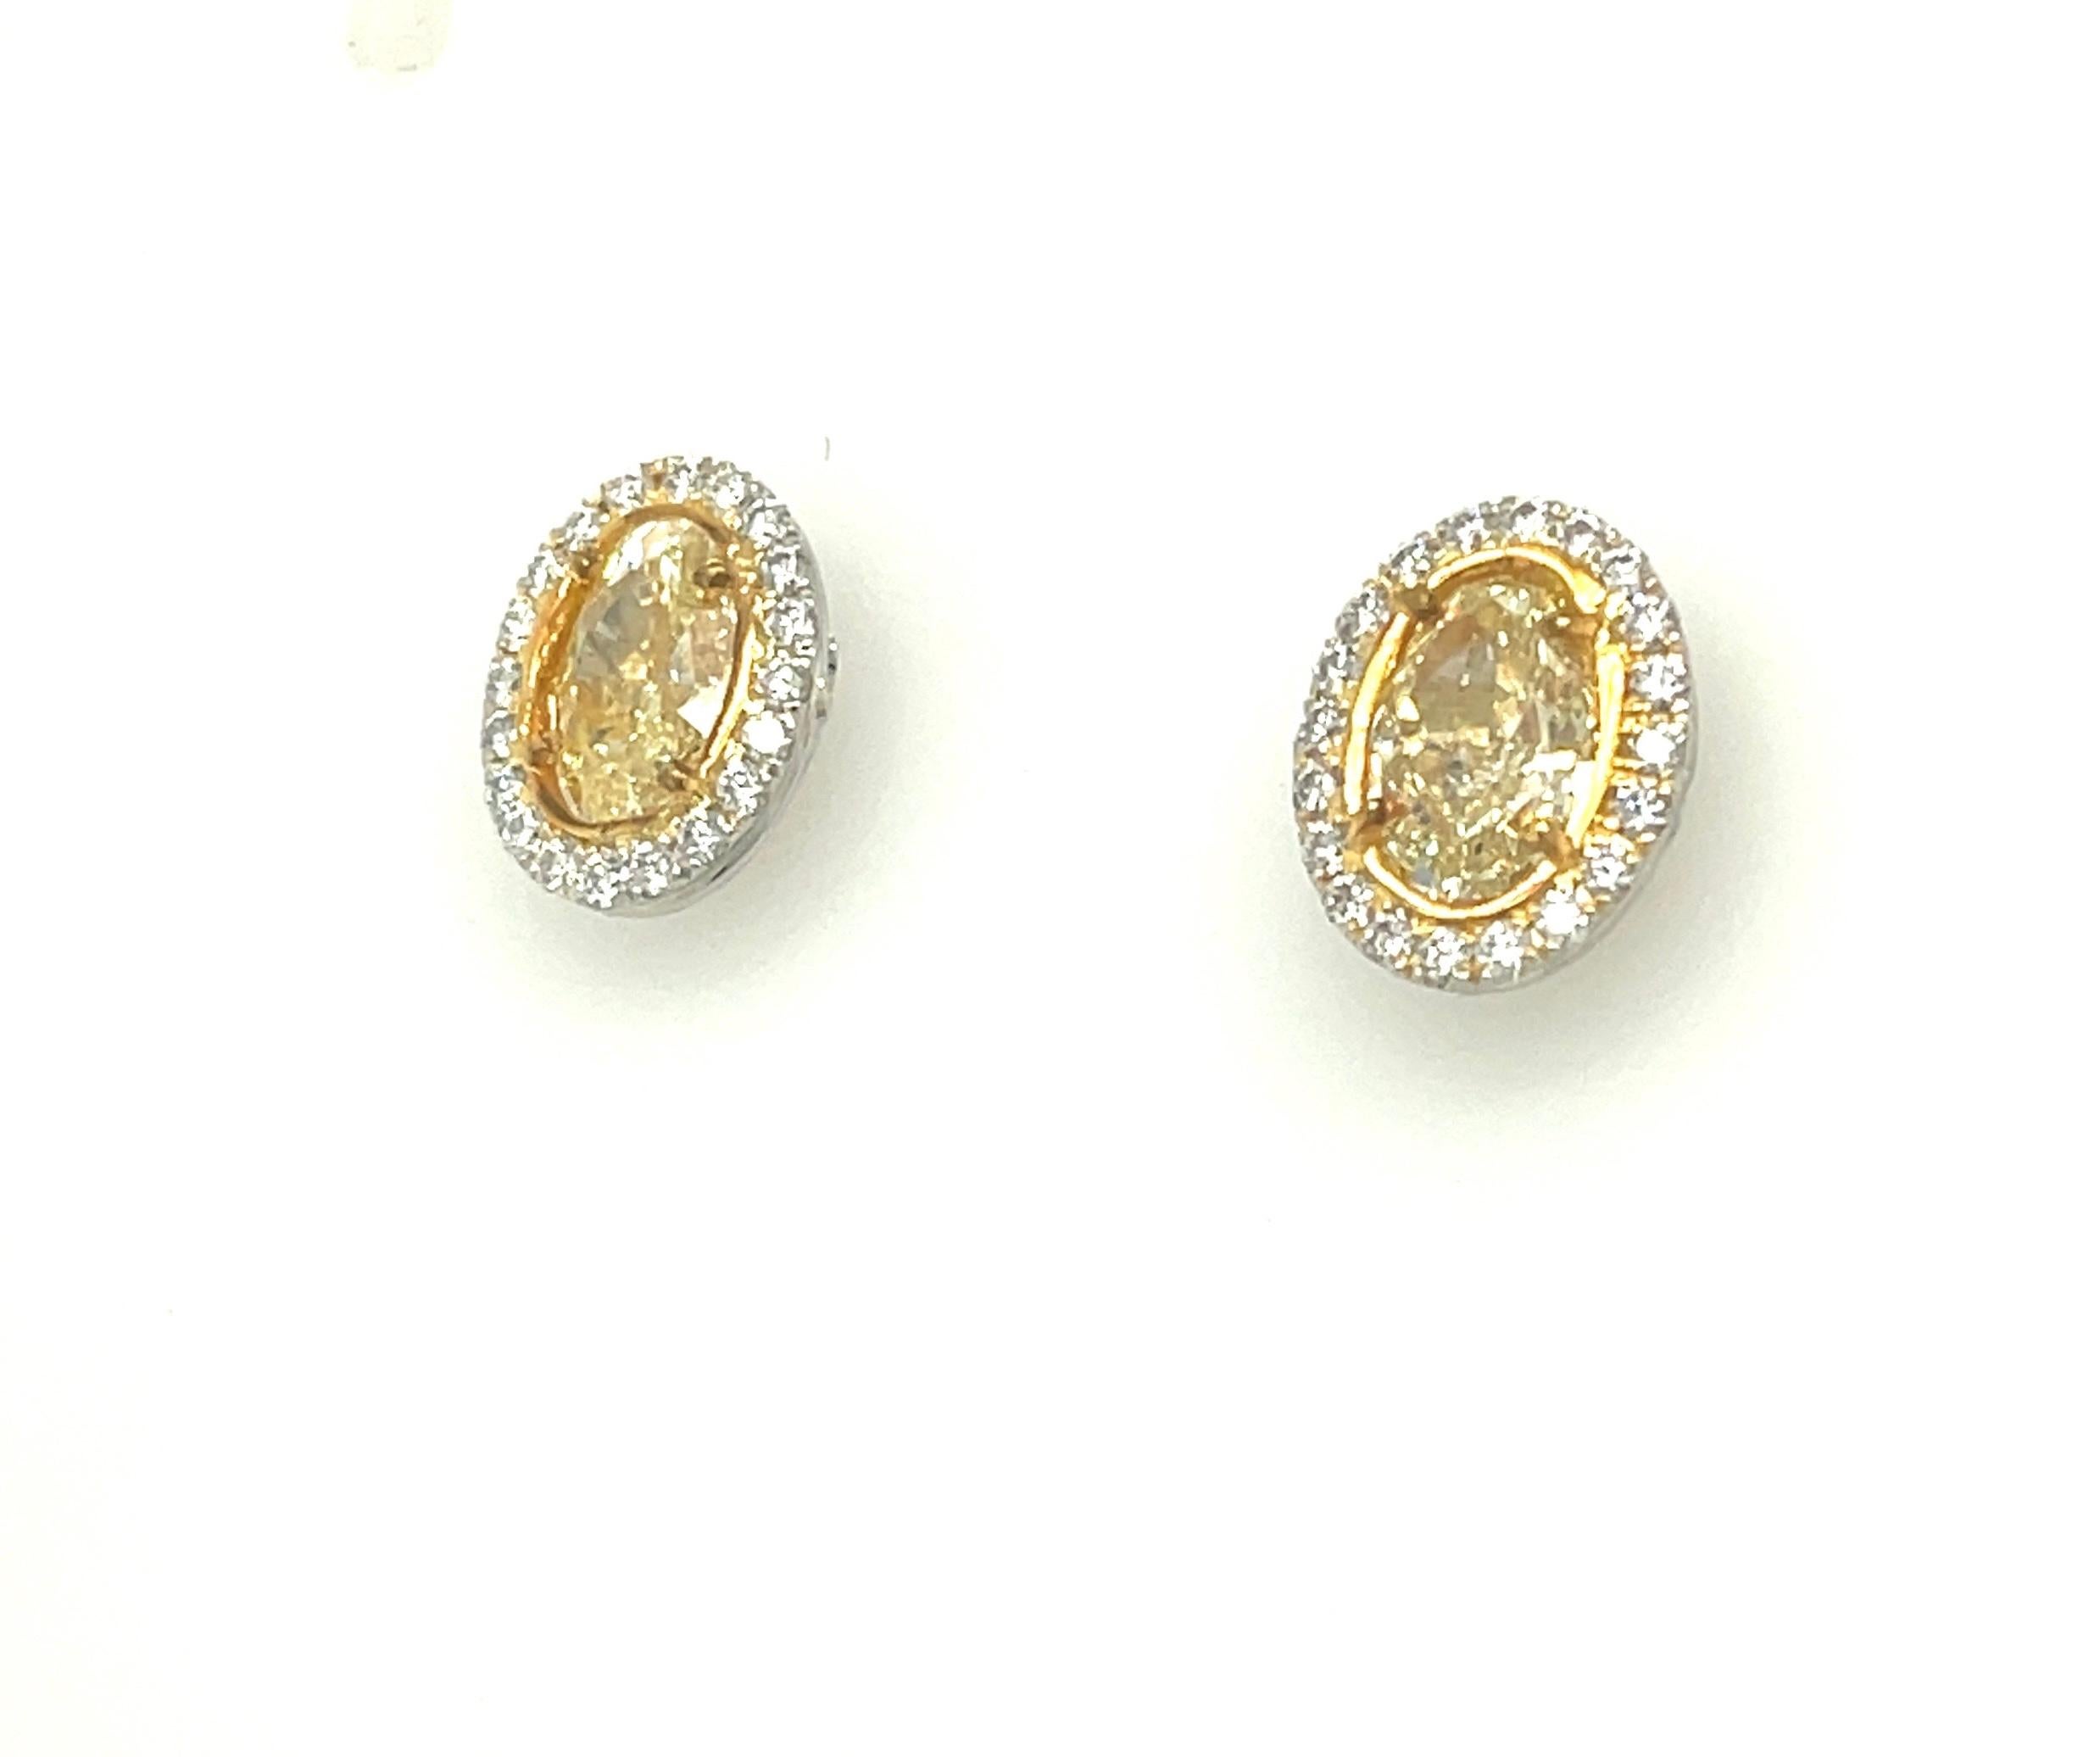 Oval Cut Oval Yellow Diamond Earrings 3.13 Carats GIA Certified Platinum / 18 KYG For Sale